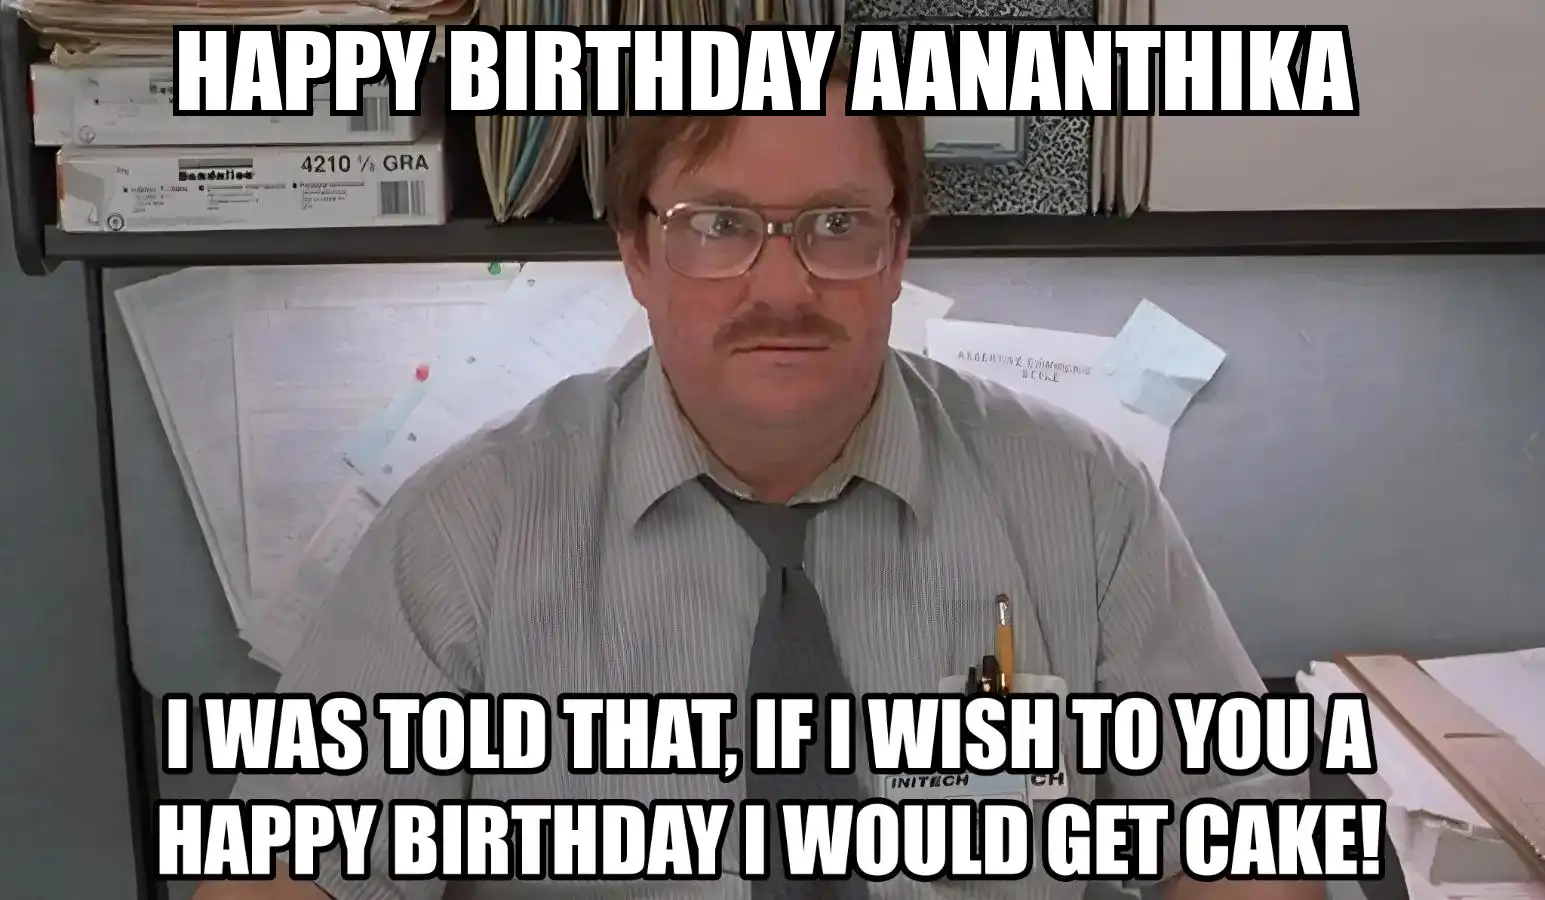 Happy Birthday Aananthika I Would Get A Cake Meme